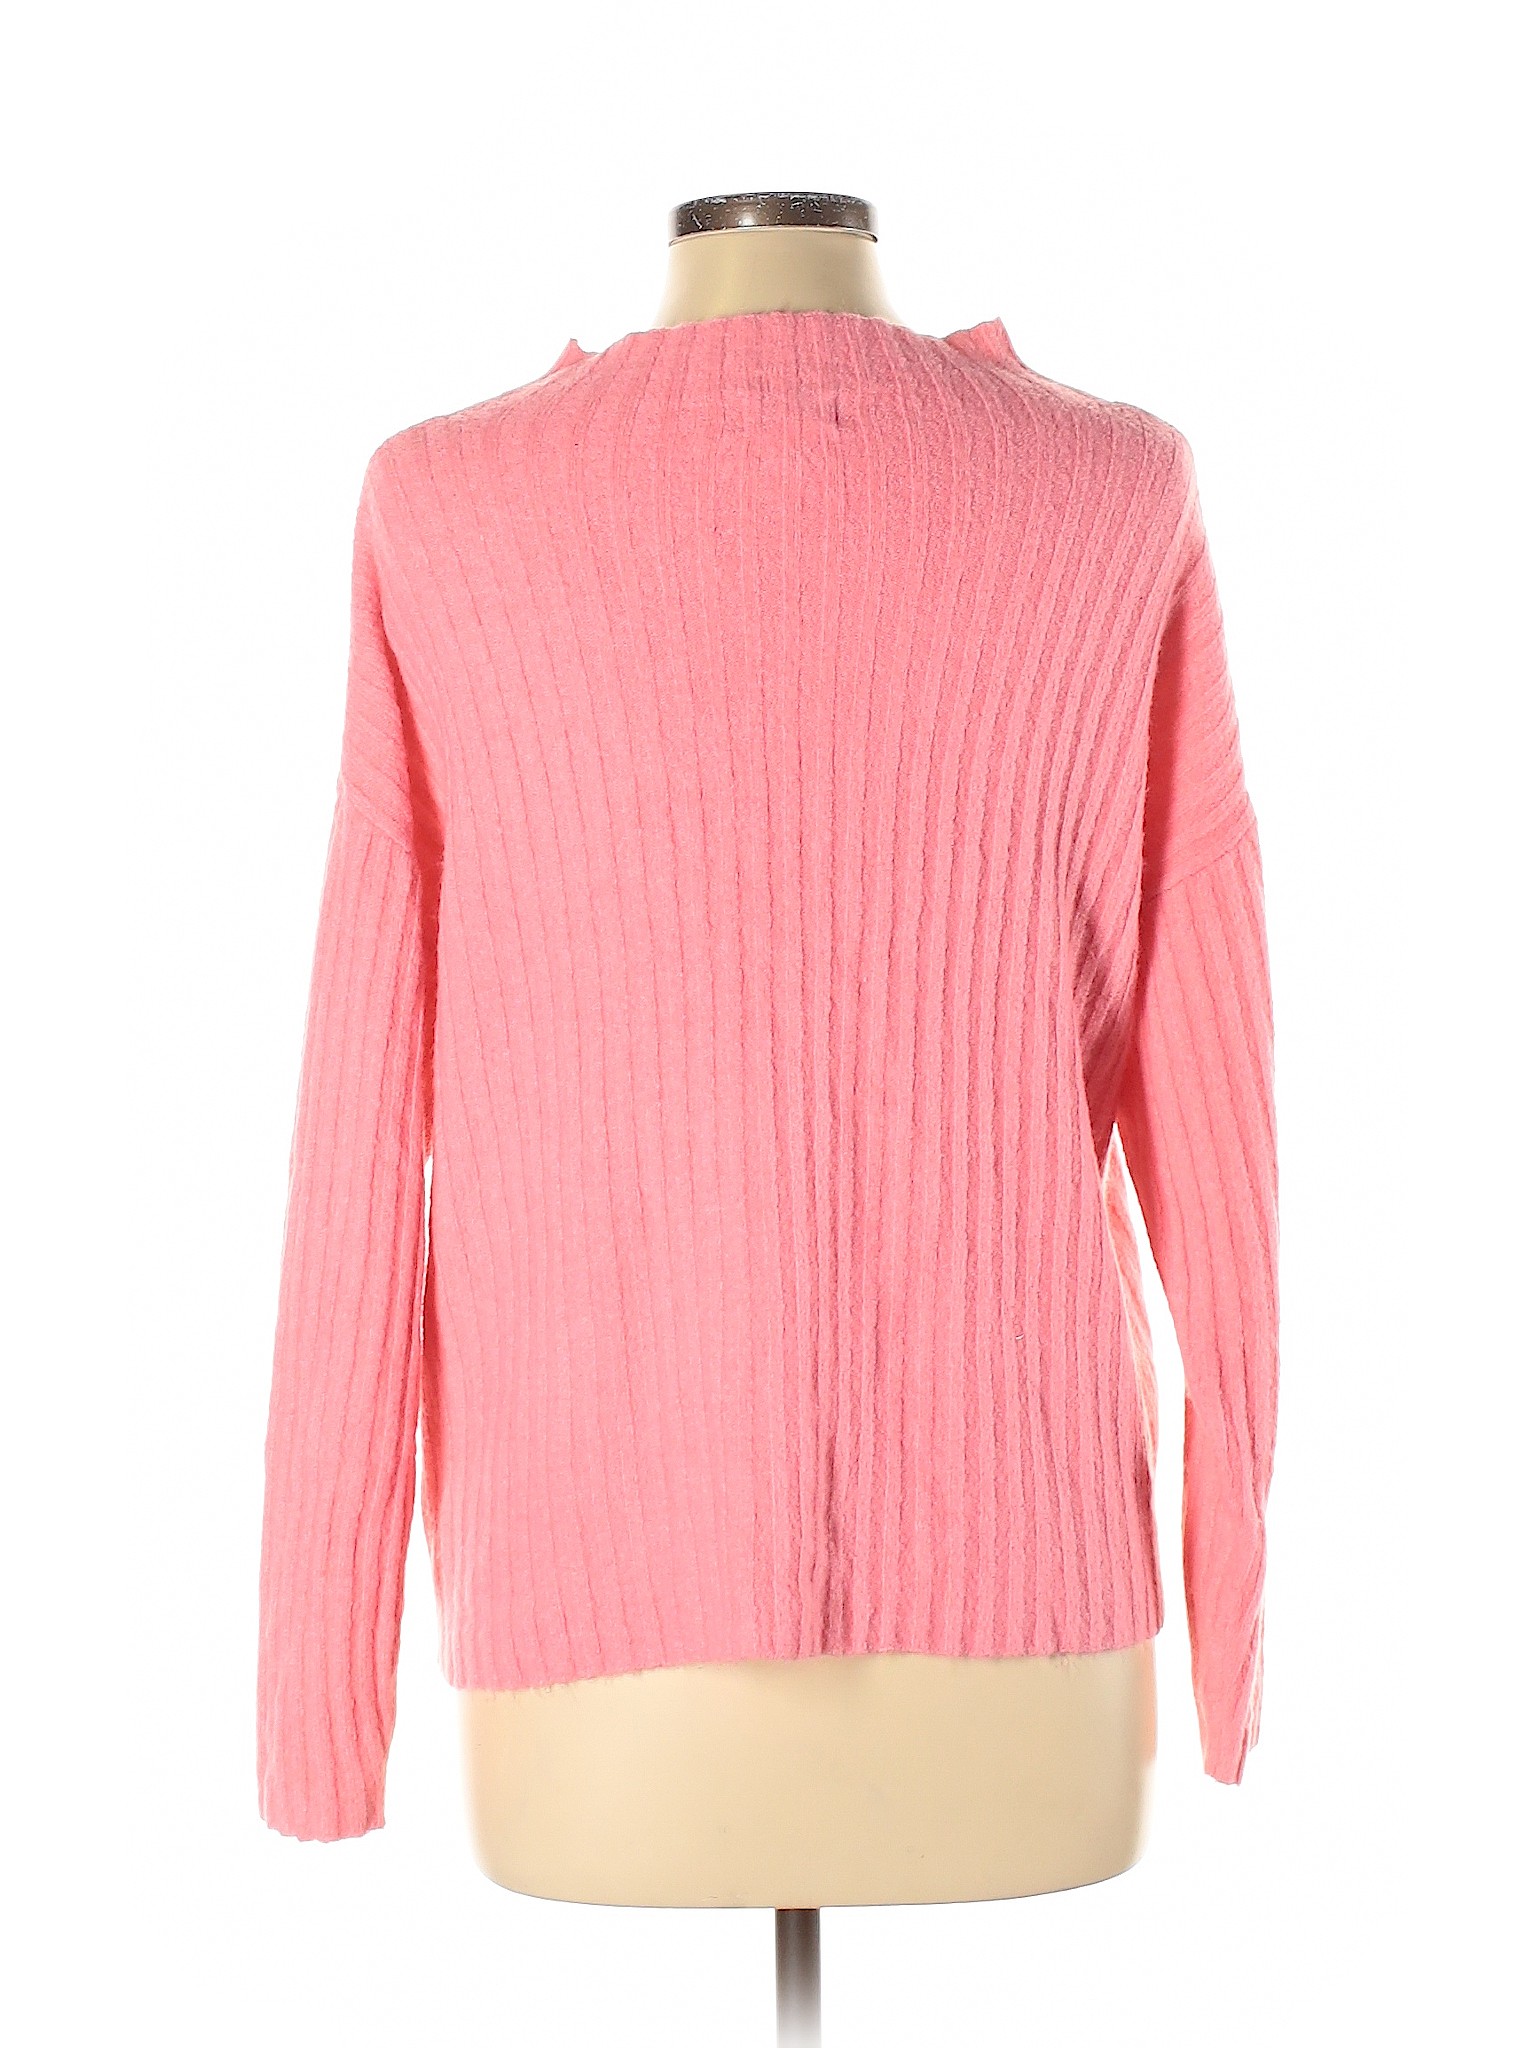 Old Navy Women Pink Pullover Sweater L | eBay